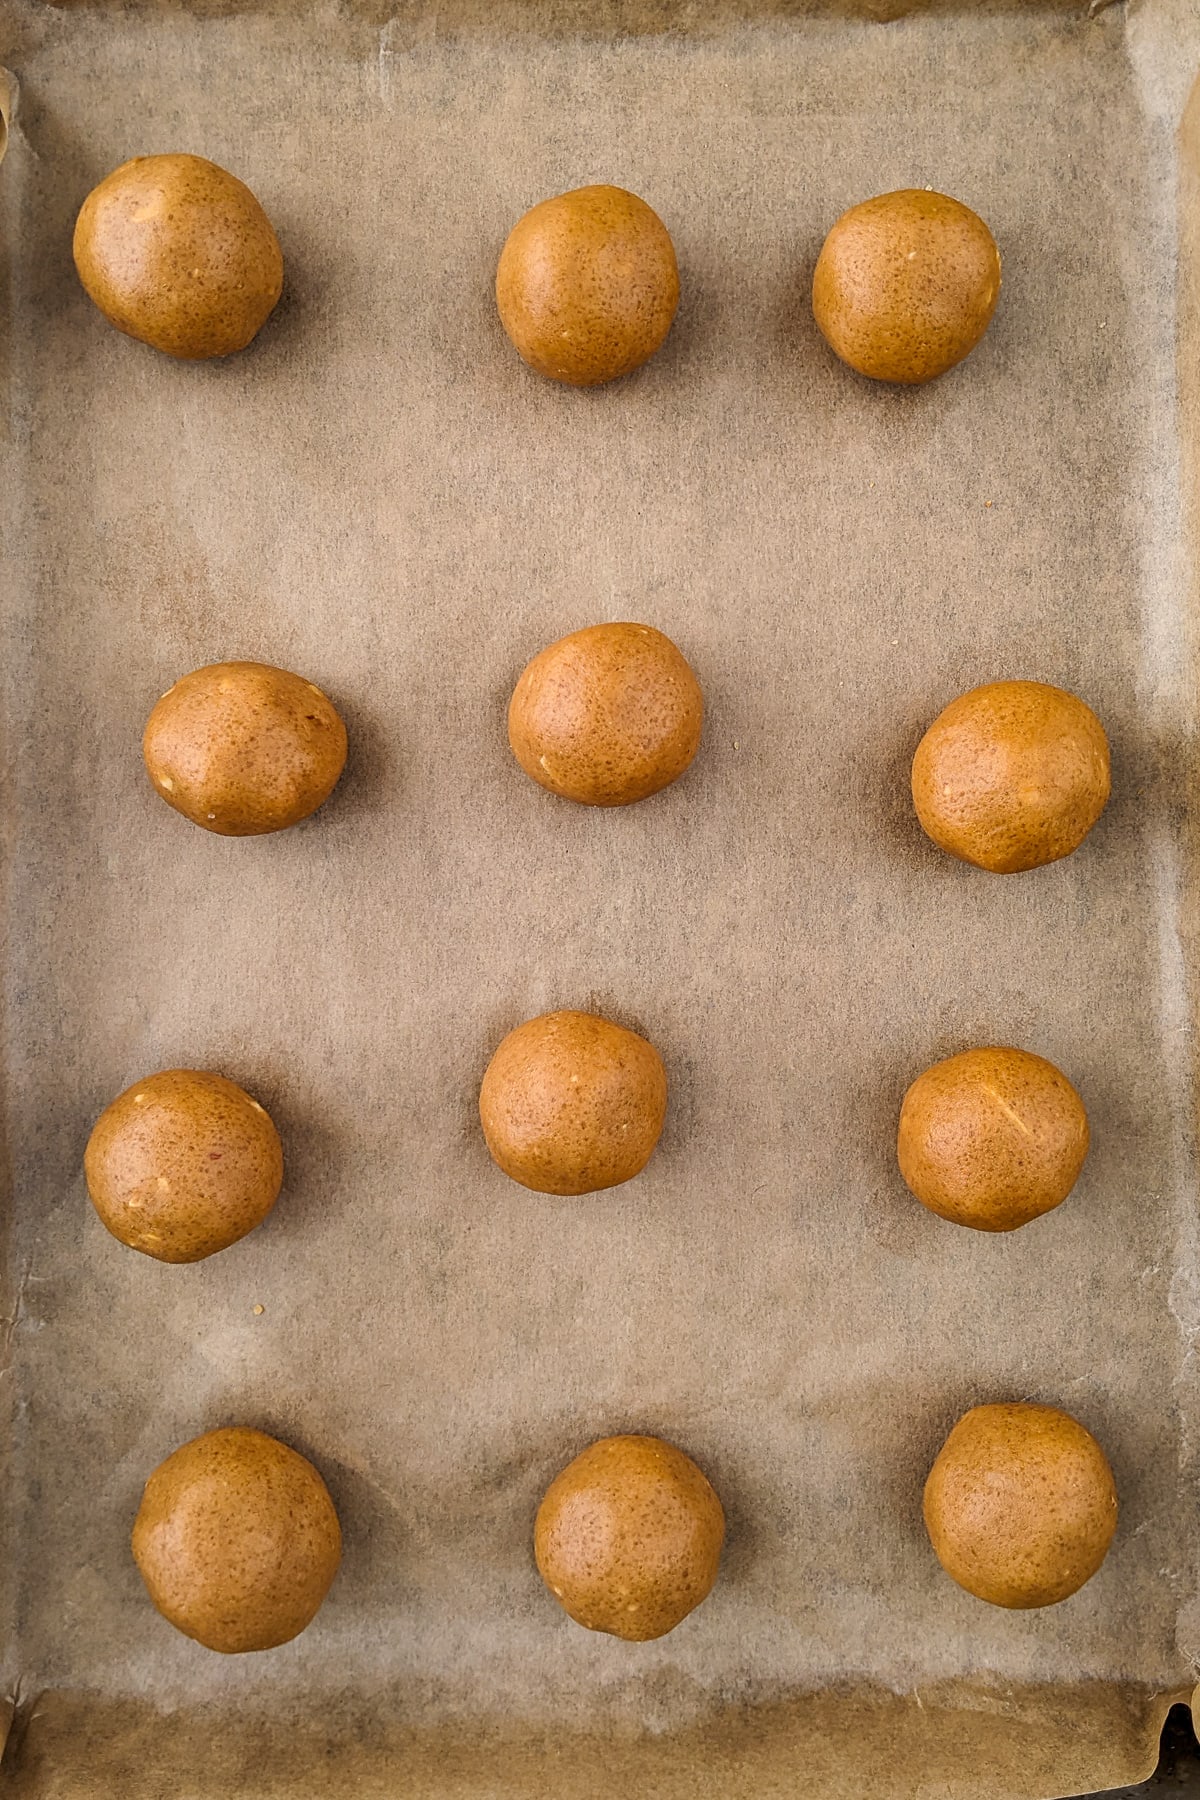 12 balls of dough on a traying bake covered with parchment paper.